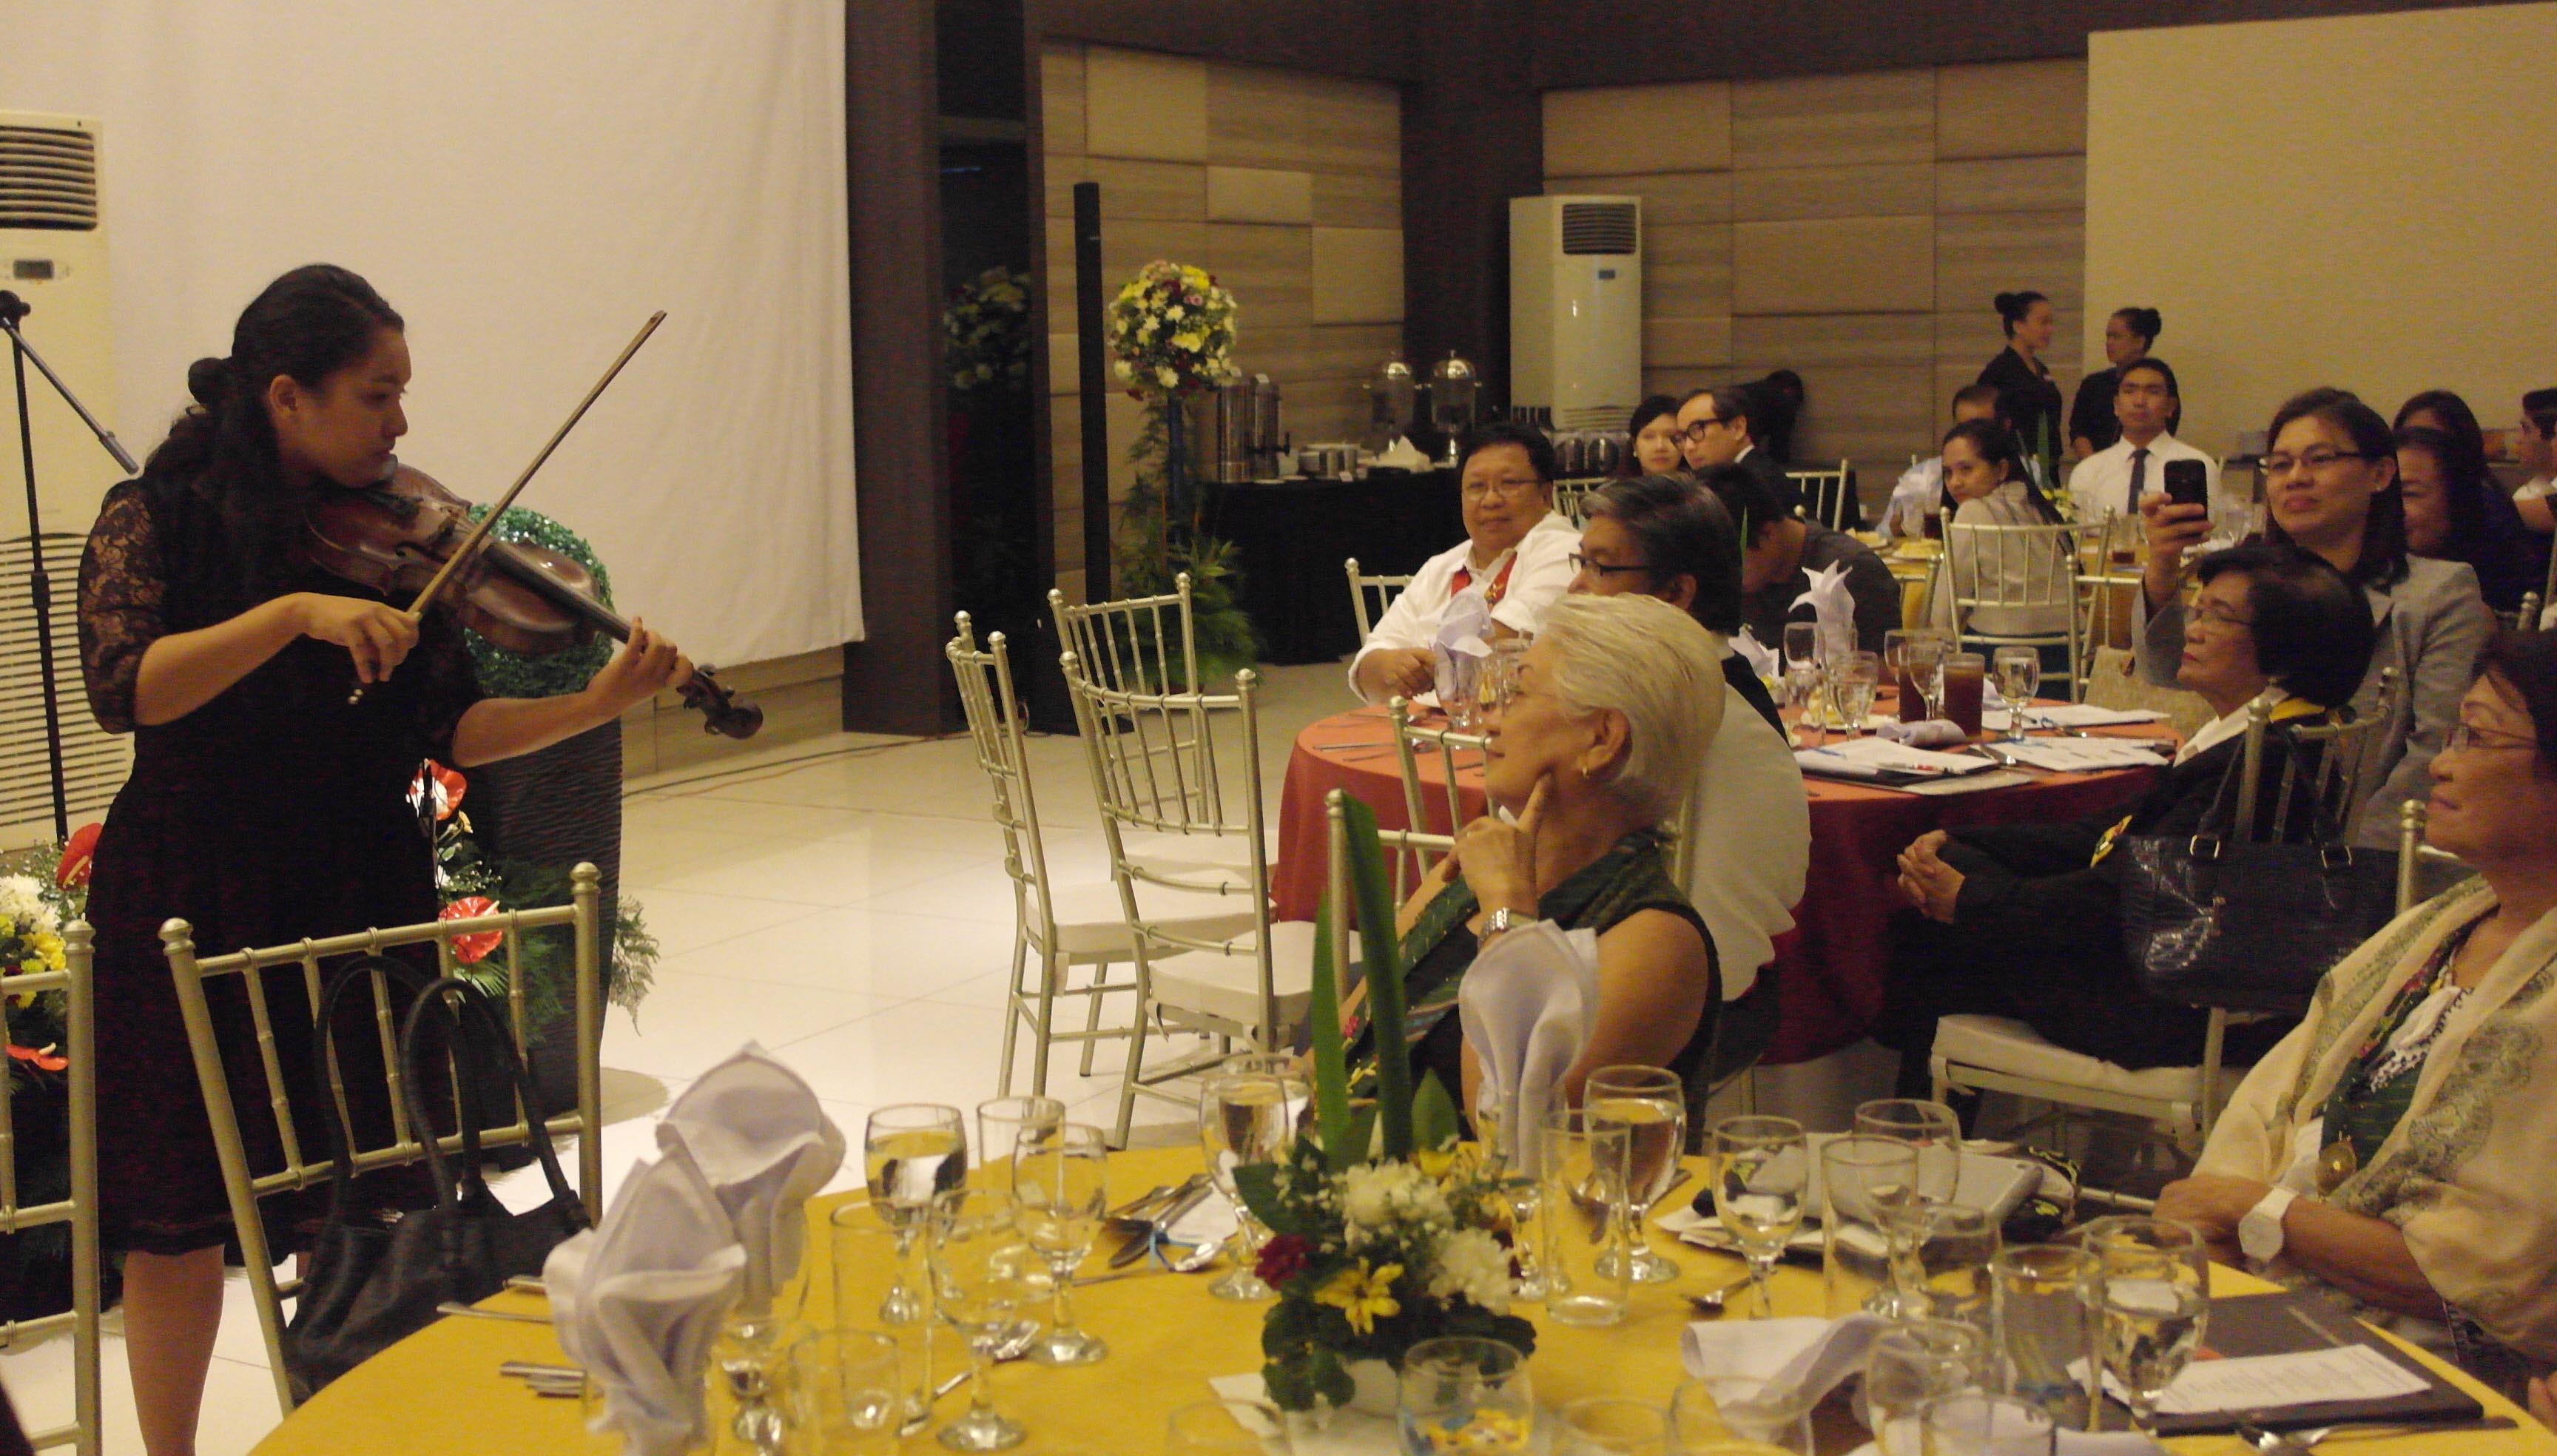 Outgoing members of the FPE Board of Trustees were serenaded by violinist Alyana Candice Czarina Altamirano